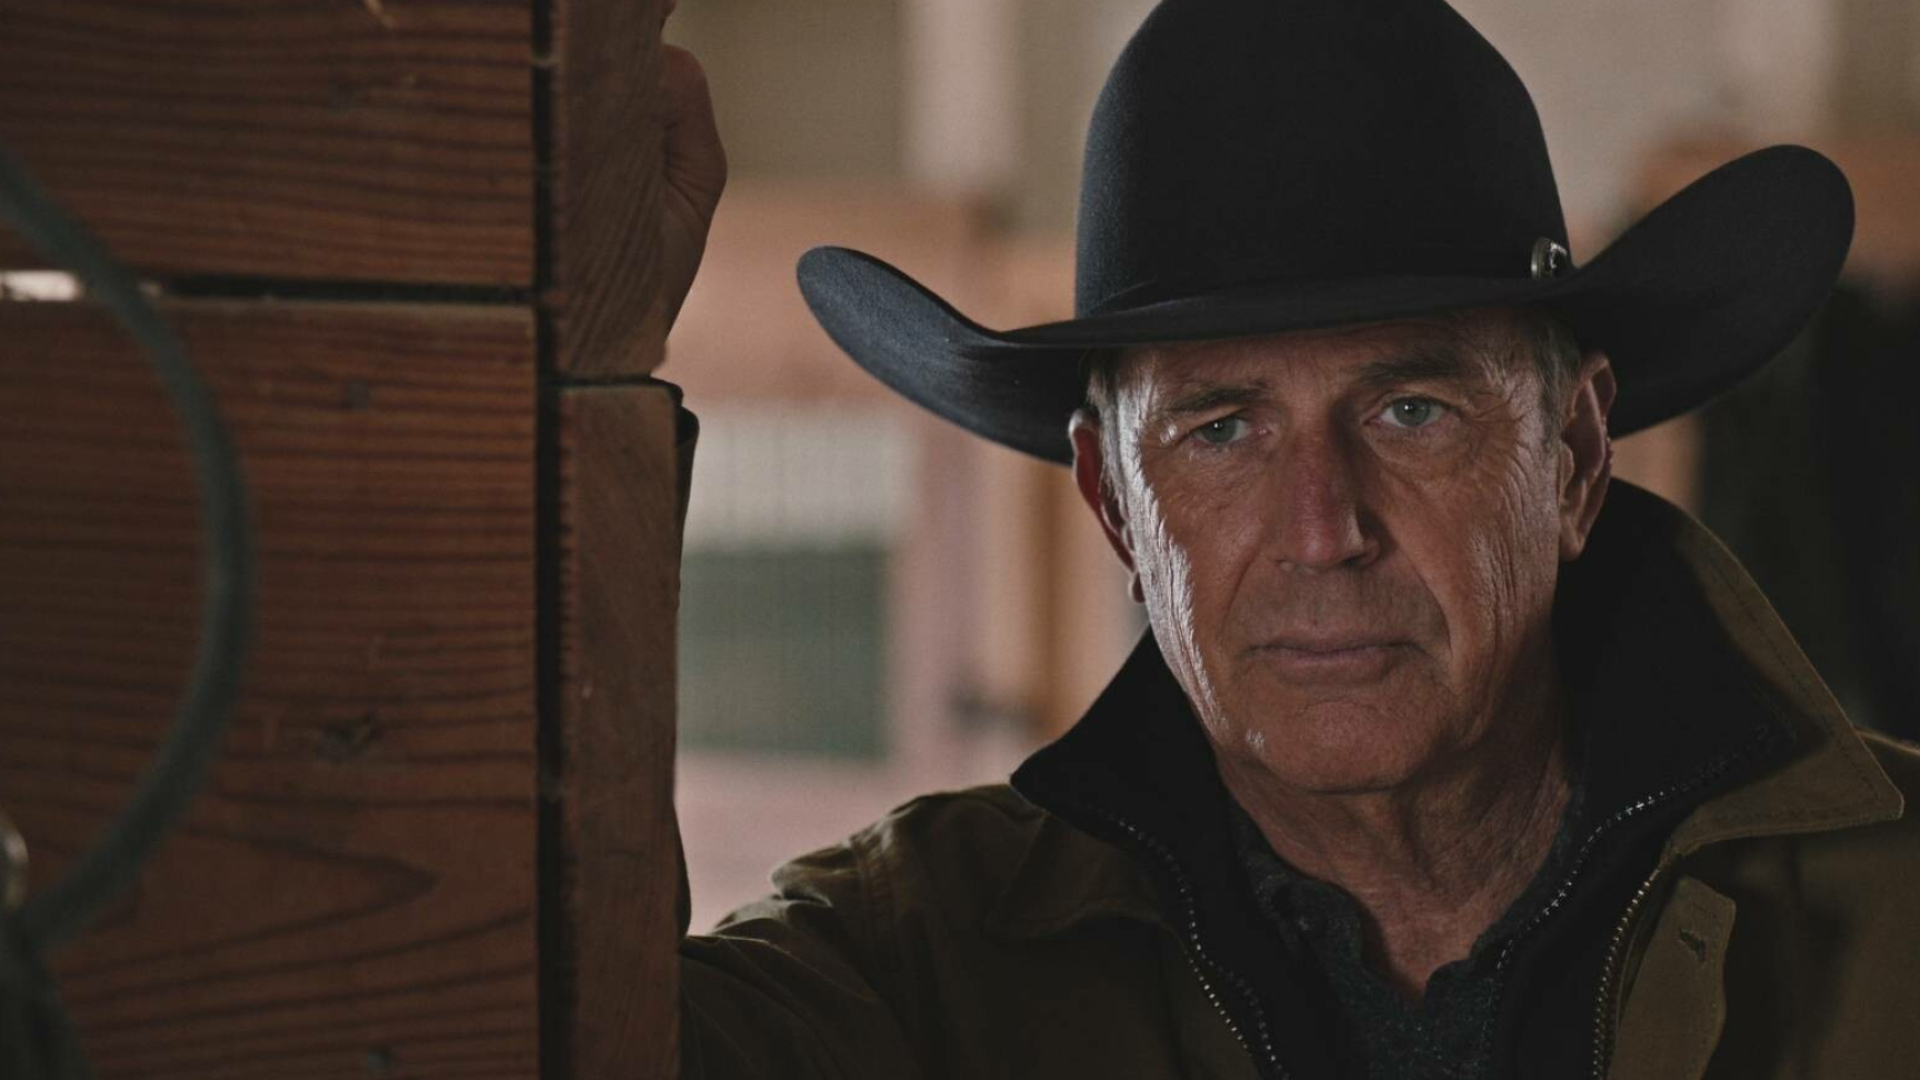 Yellowstone (TV Series): John Dutton, The former Livestock Commissioner for the state of Montana. 1920x1080 Full HD Wallpaper.